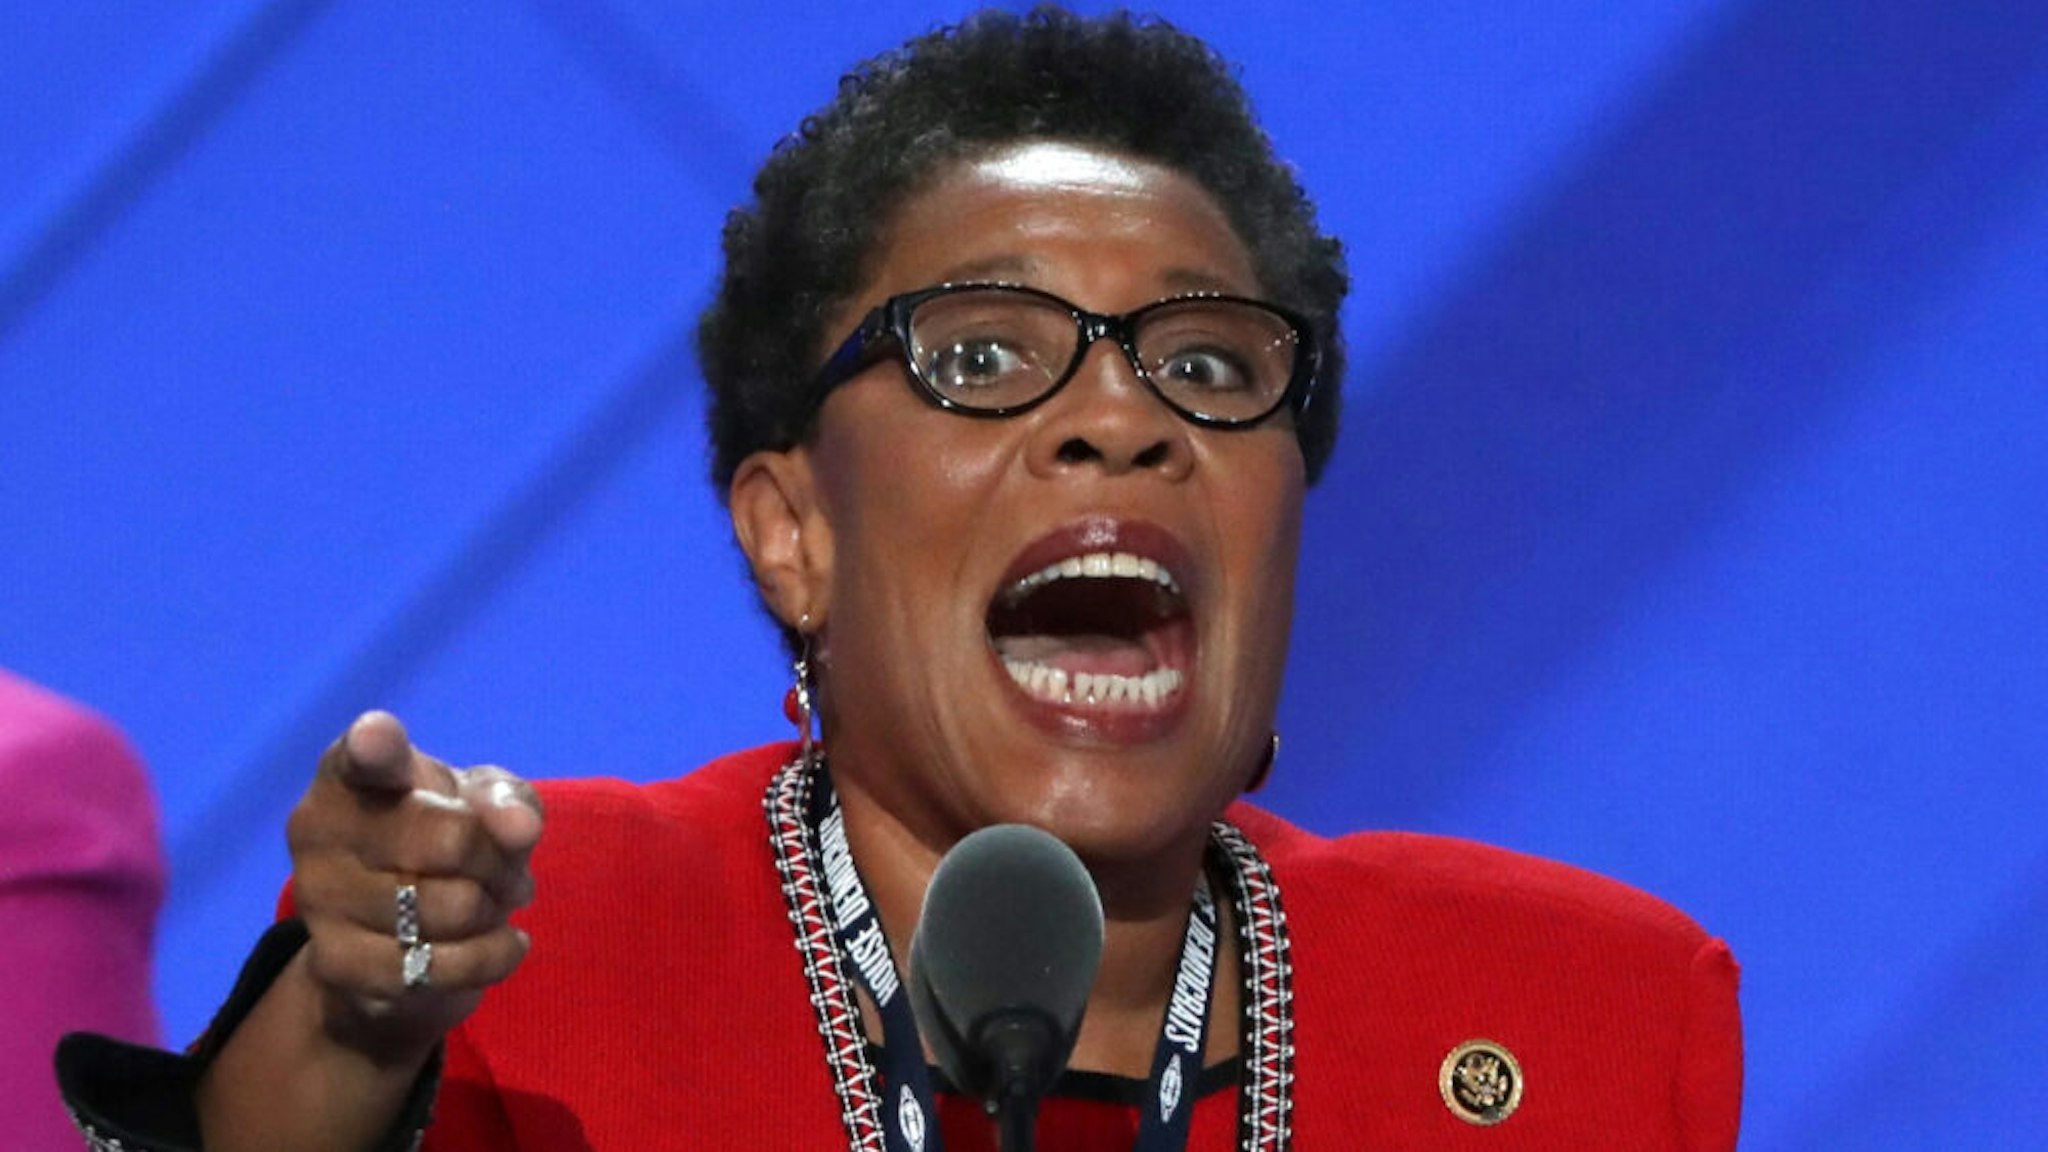 PHILADELPHIA, PA - JULY 25: U.S. Rep Marcia Fudge (D-OH) speaks during the opening of the first day of the Democratic National Convention at the Wells Fargo Center, July 25, 2016 in Philadelphia, Pennsylvania. An estimated 50,000 people are expected in Philadelphia, including hundreds of protesters and members of the media. The four-day Democratic National Convention kicked off July 25.